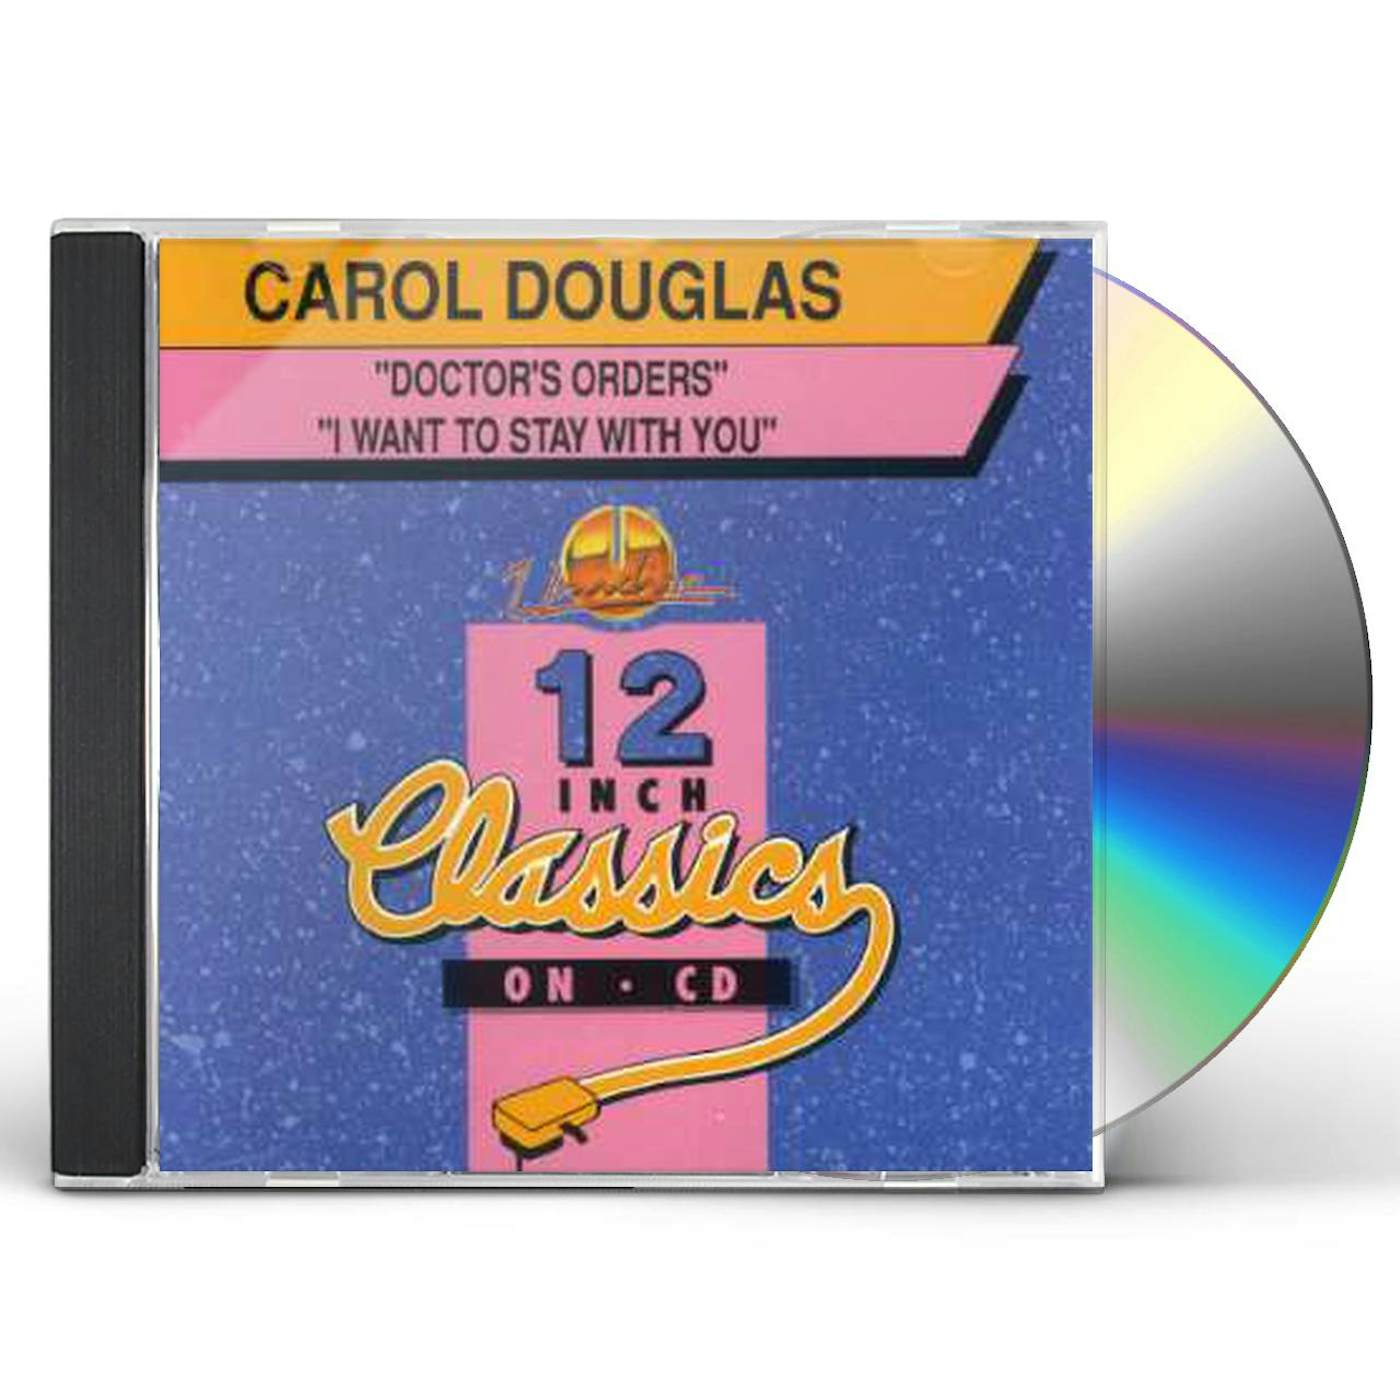 Carol Douglas DOCTORS ORDERS/I WANT TO STAY WITH YOU CD